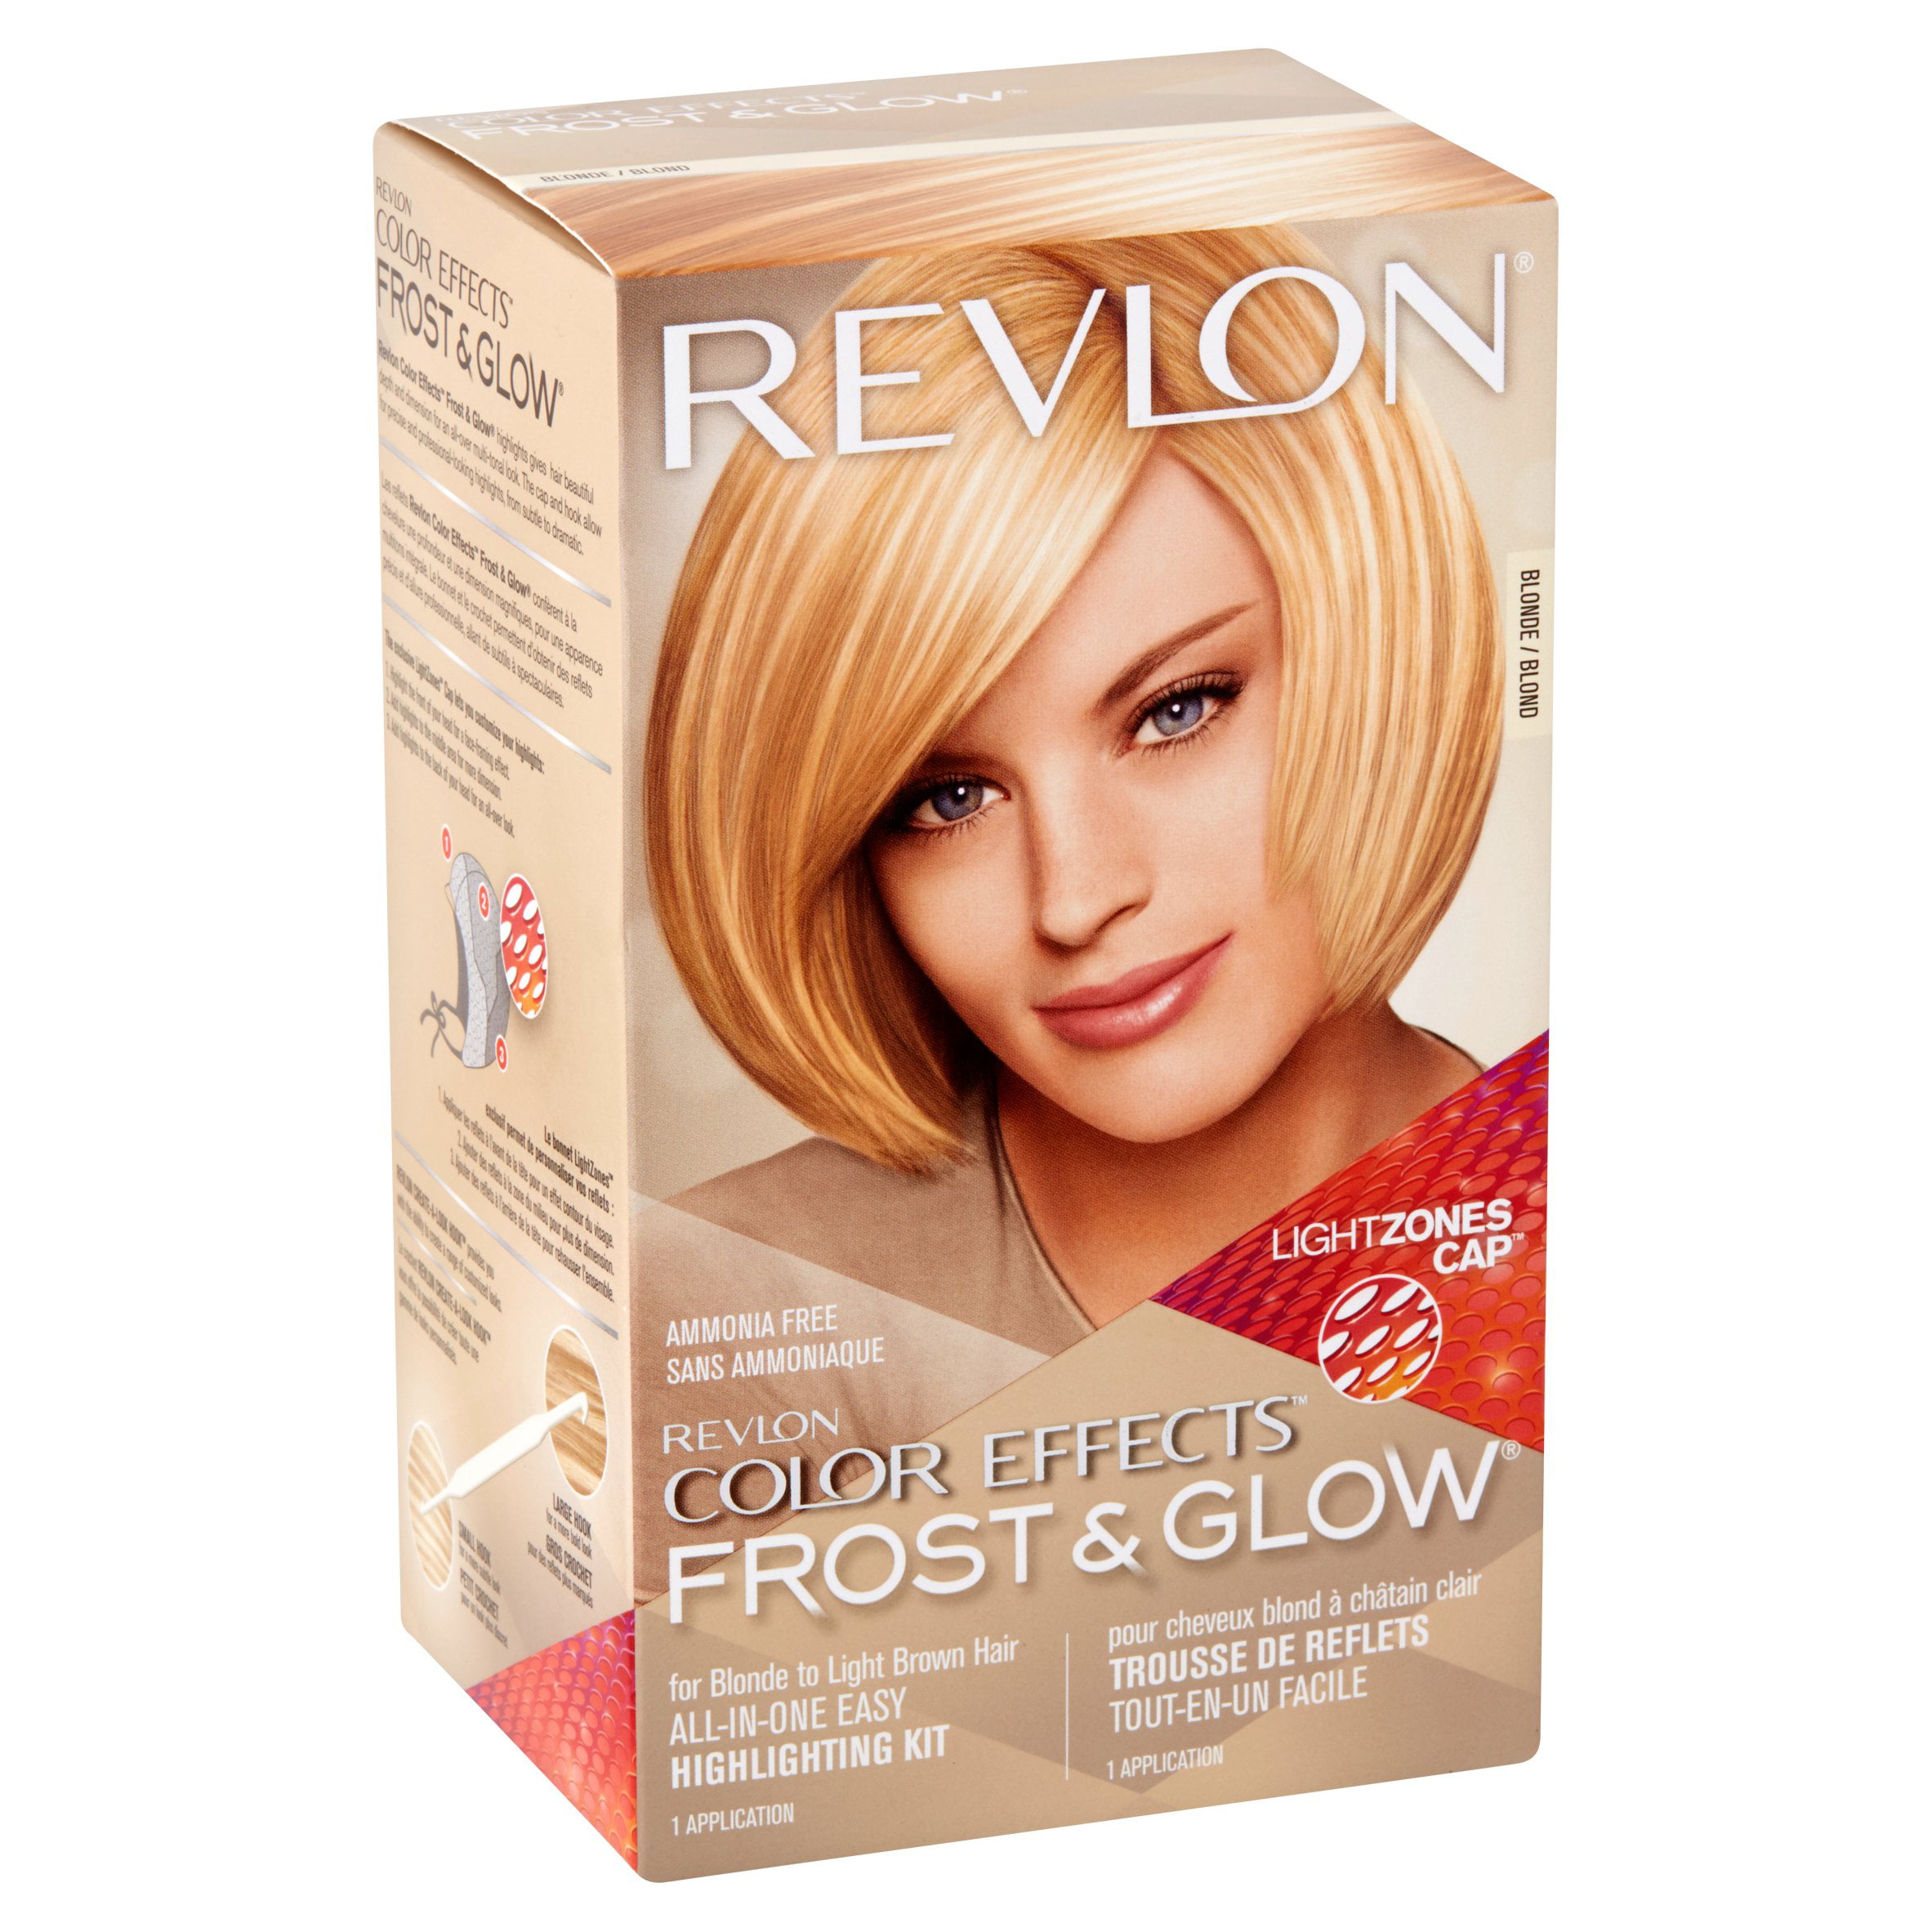 Revlon Frost And Glow Color Chart